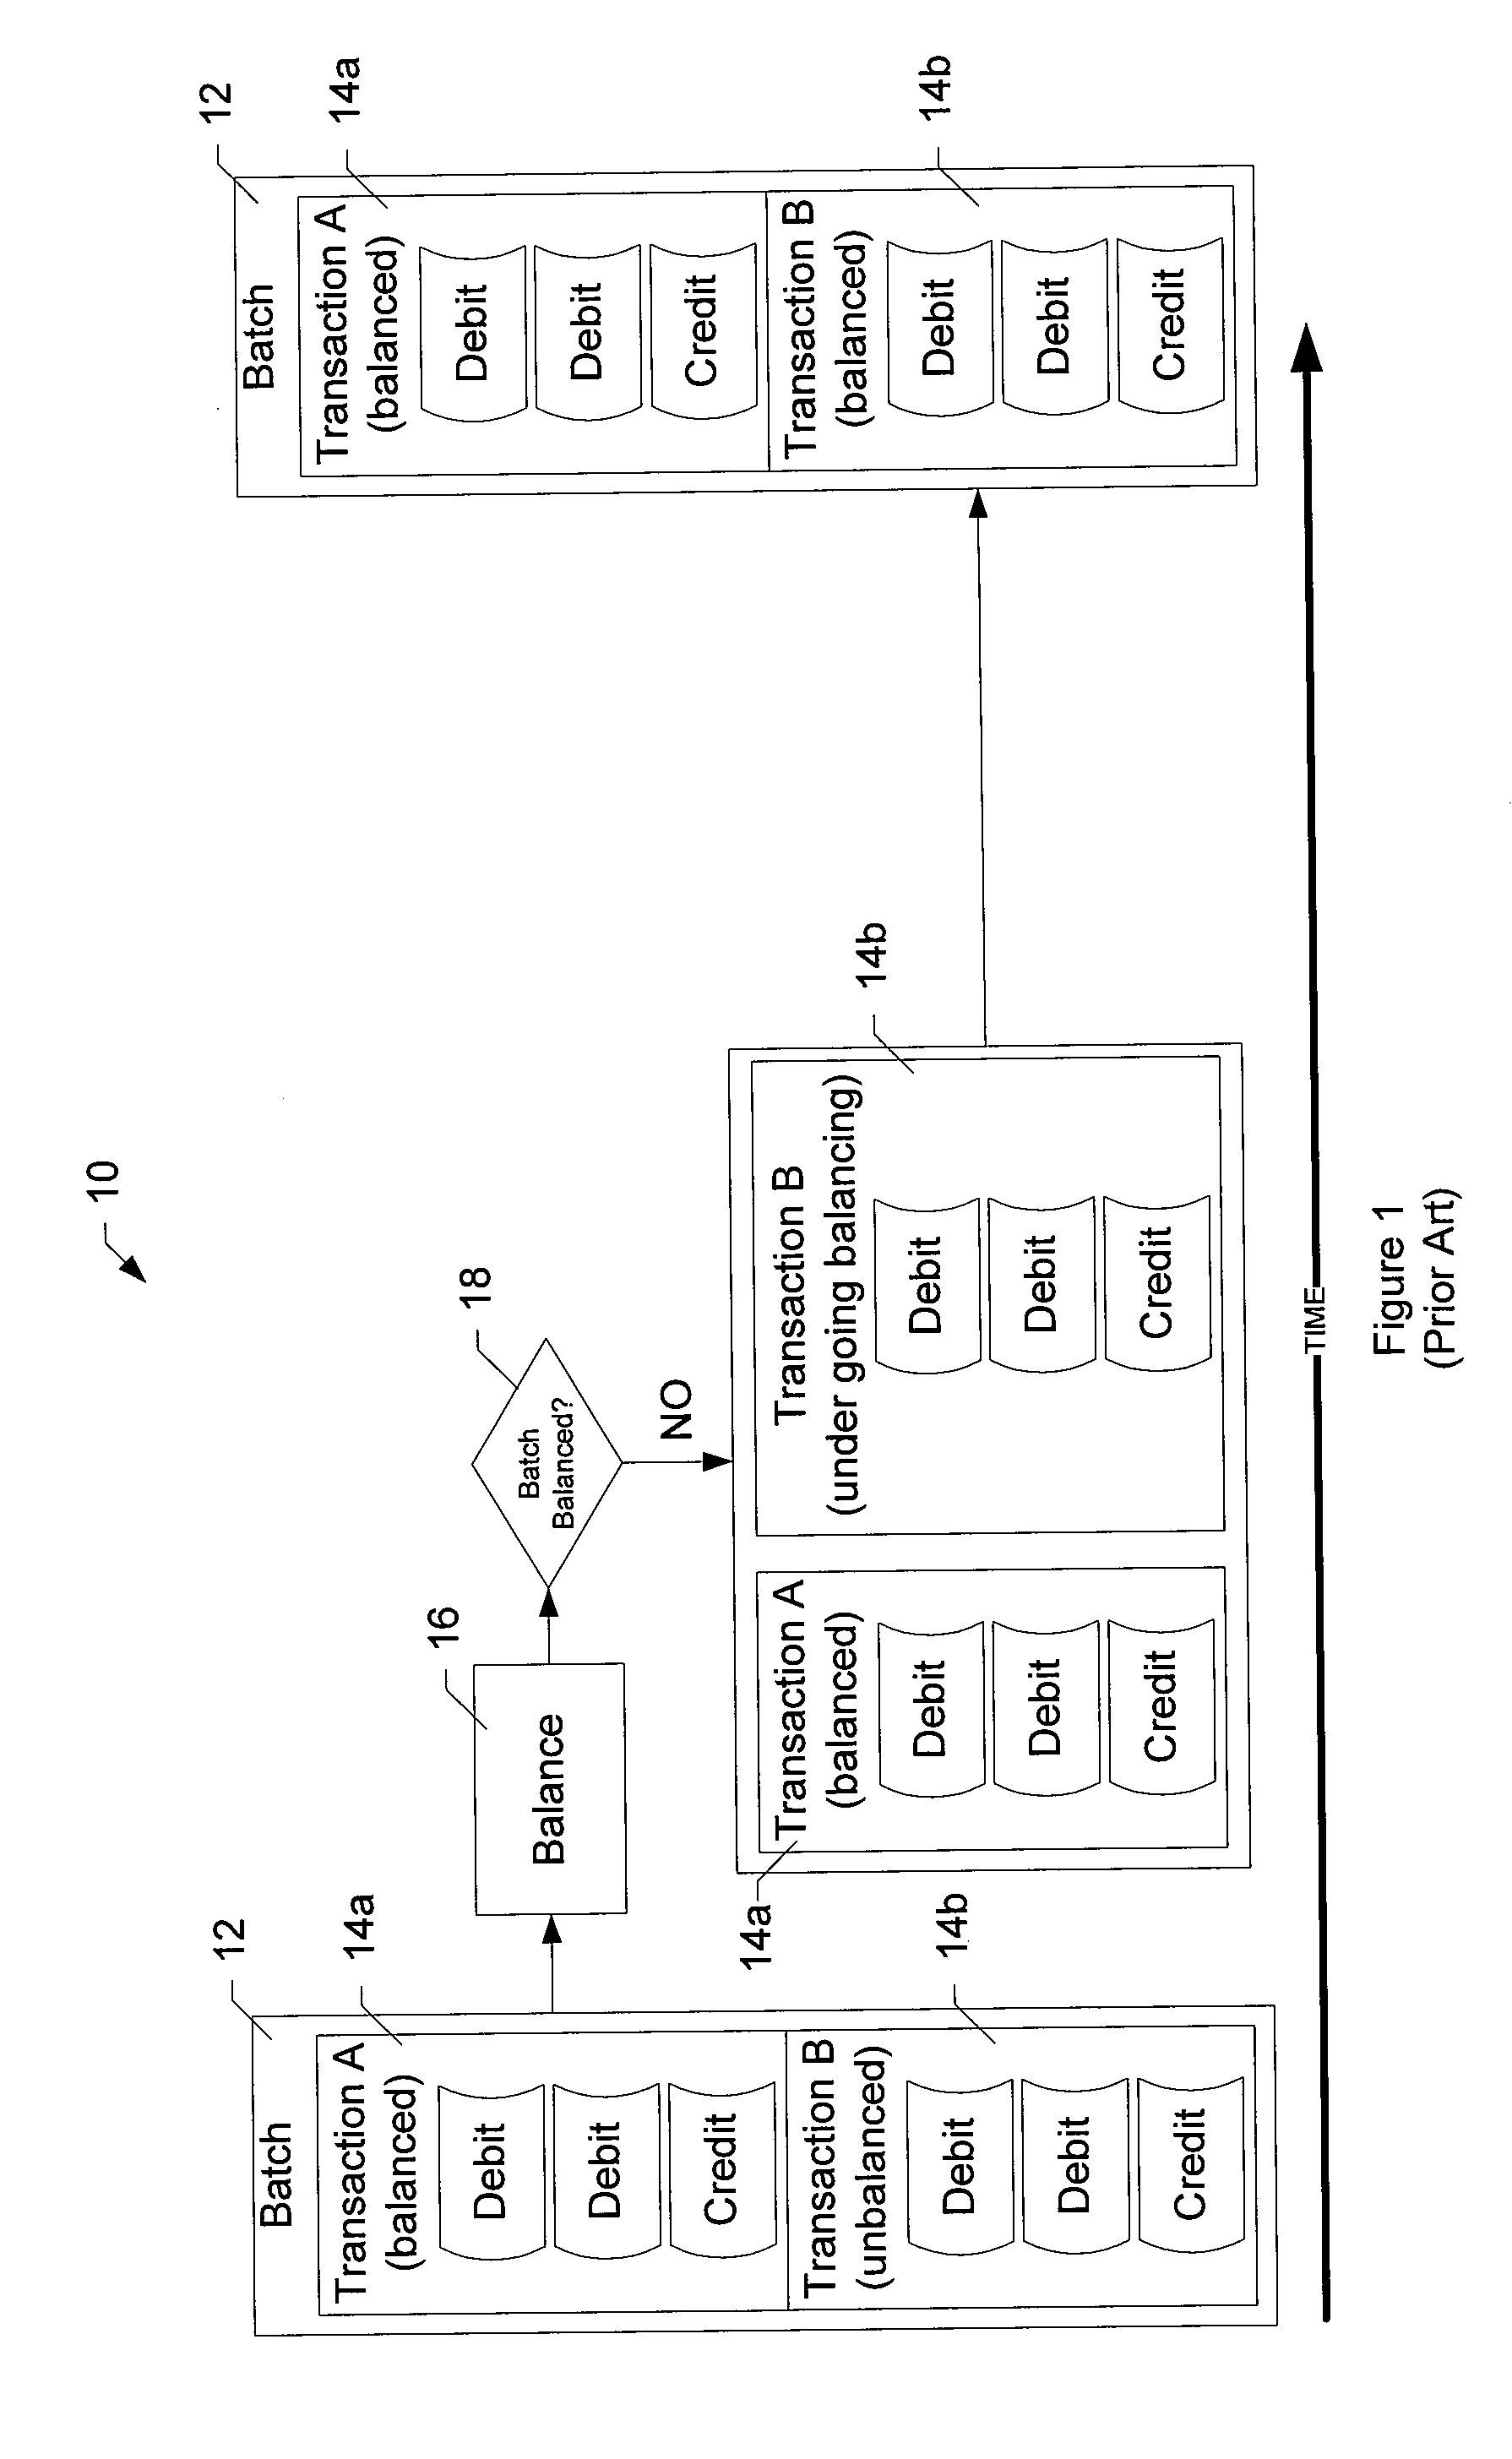 Systems, methods, and computer program products for performing item level transaction processing